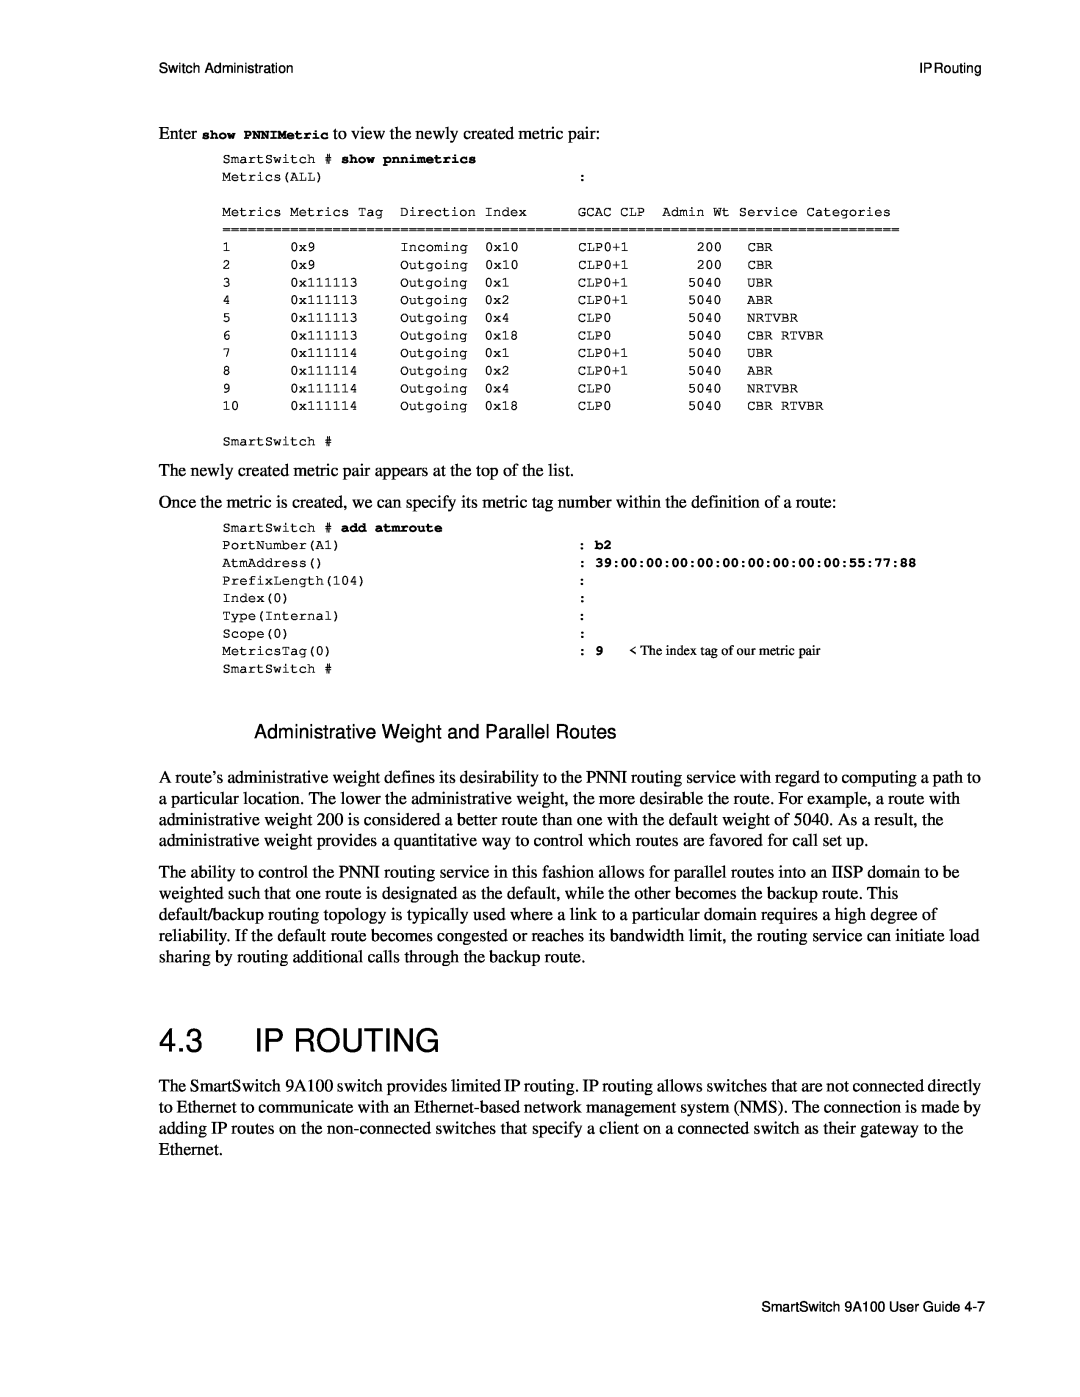 Cabletron Systems 9A100 manual Ip Routing, Administrative Weight and Parallel Routes 